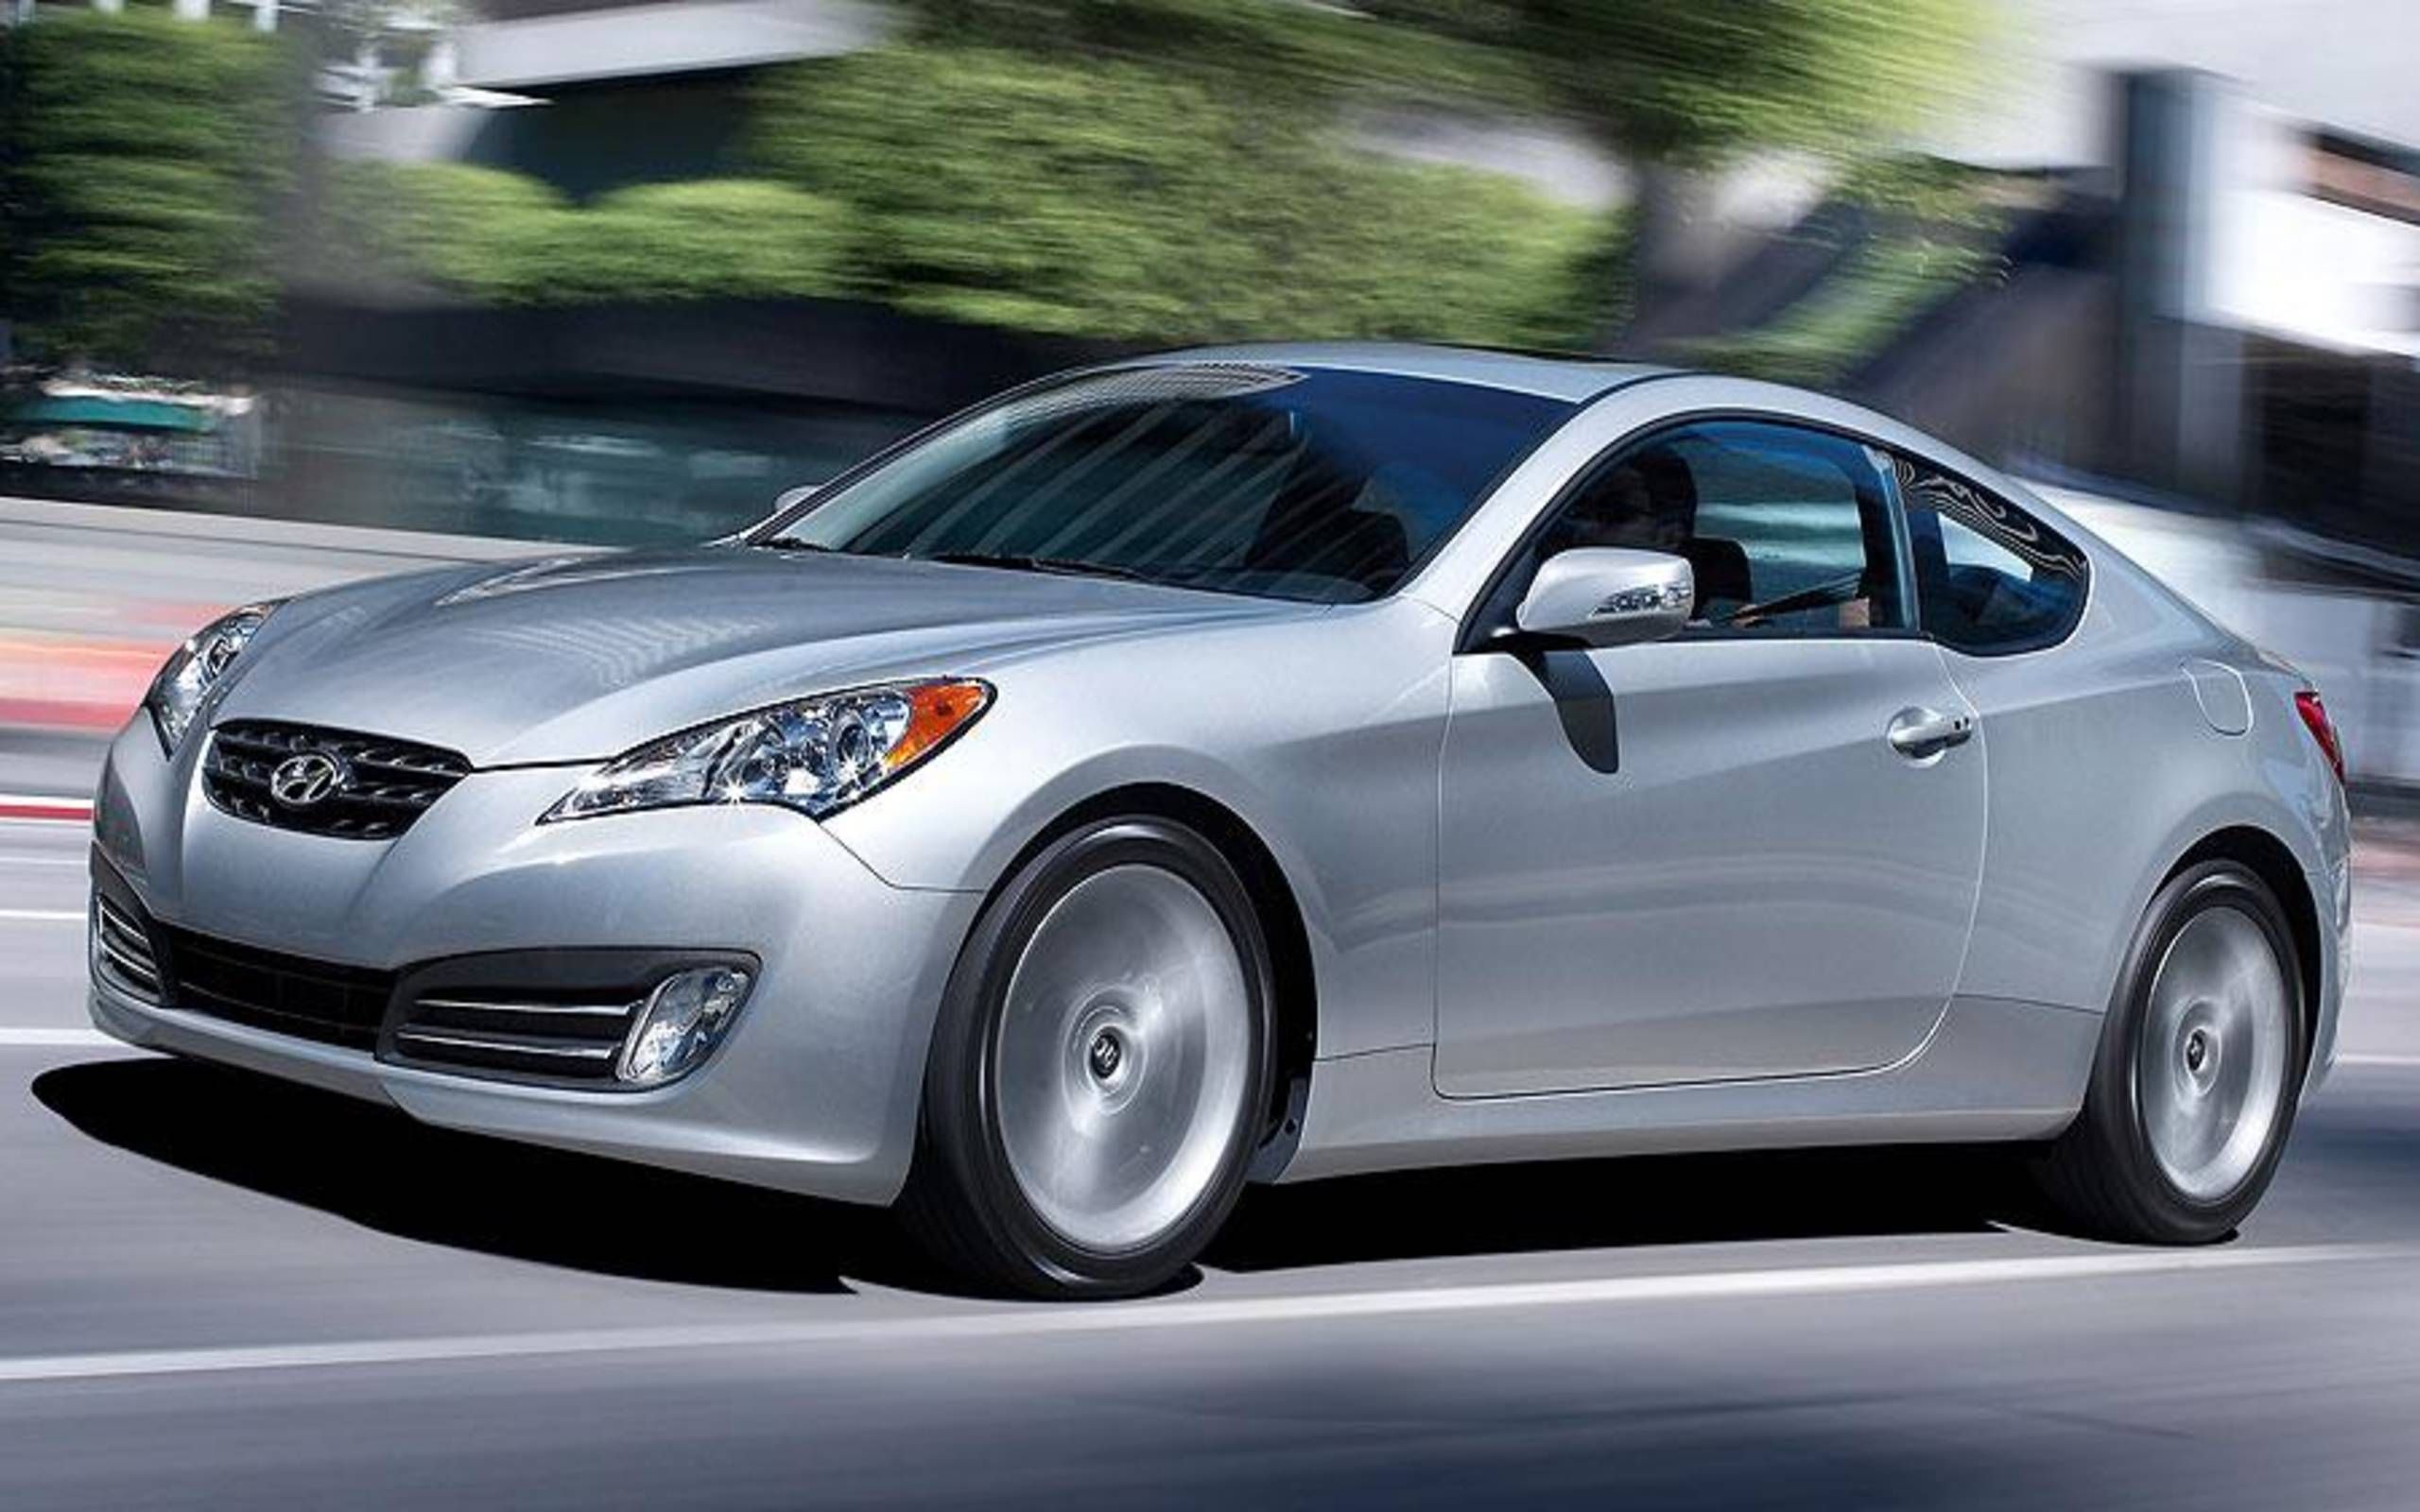 Hyundai Genesis Coupe: Rear drive and sporty attitude adds up to big fun